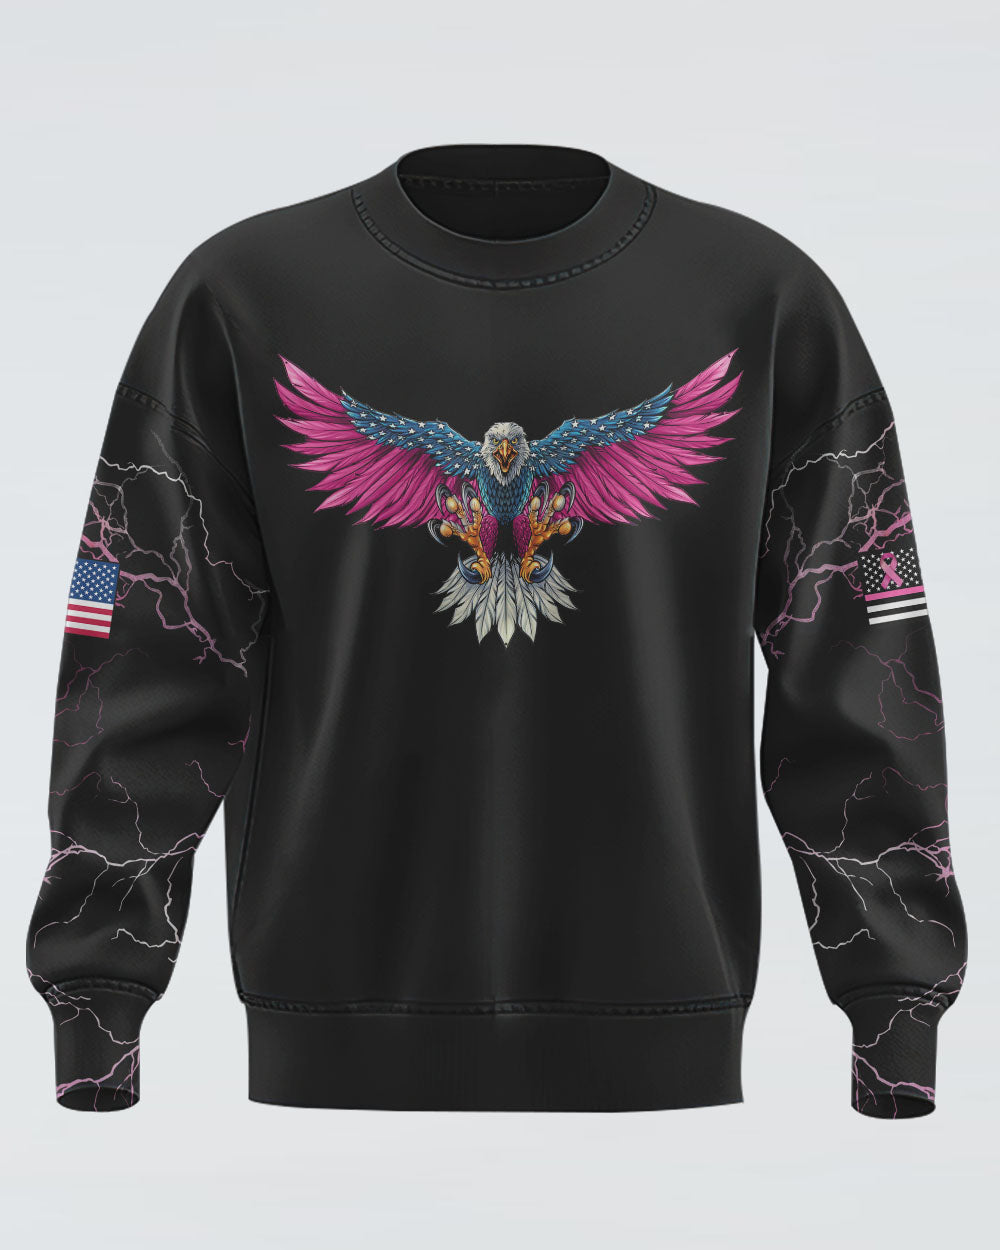 Be Stronger Than The Storm Eagle With Flag Women's Breast Cancer Awareness Sweatshirt